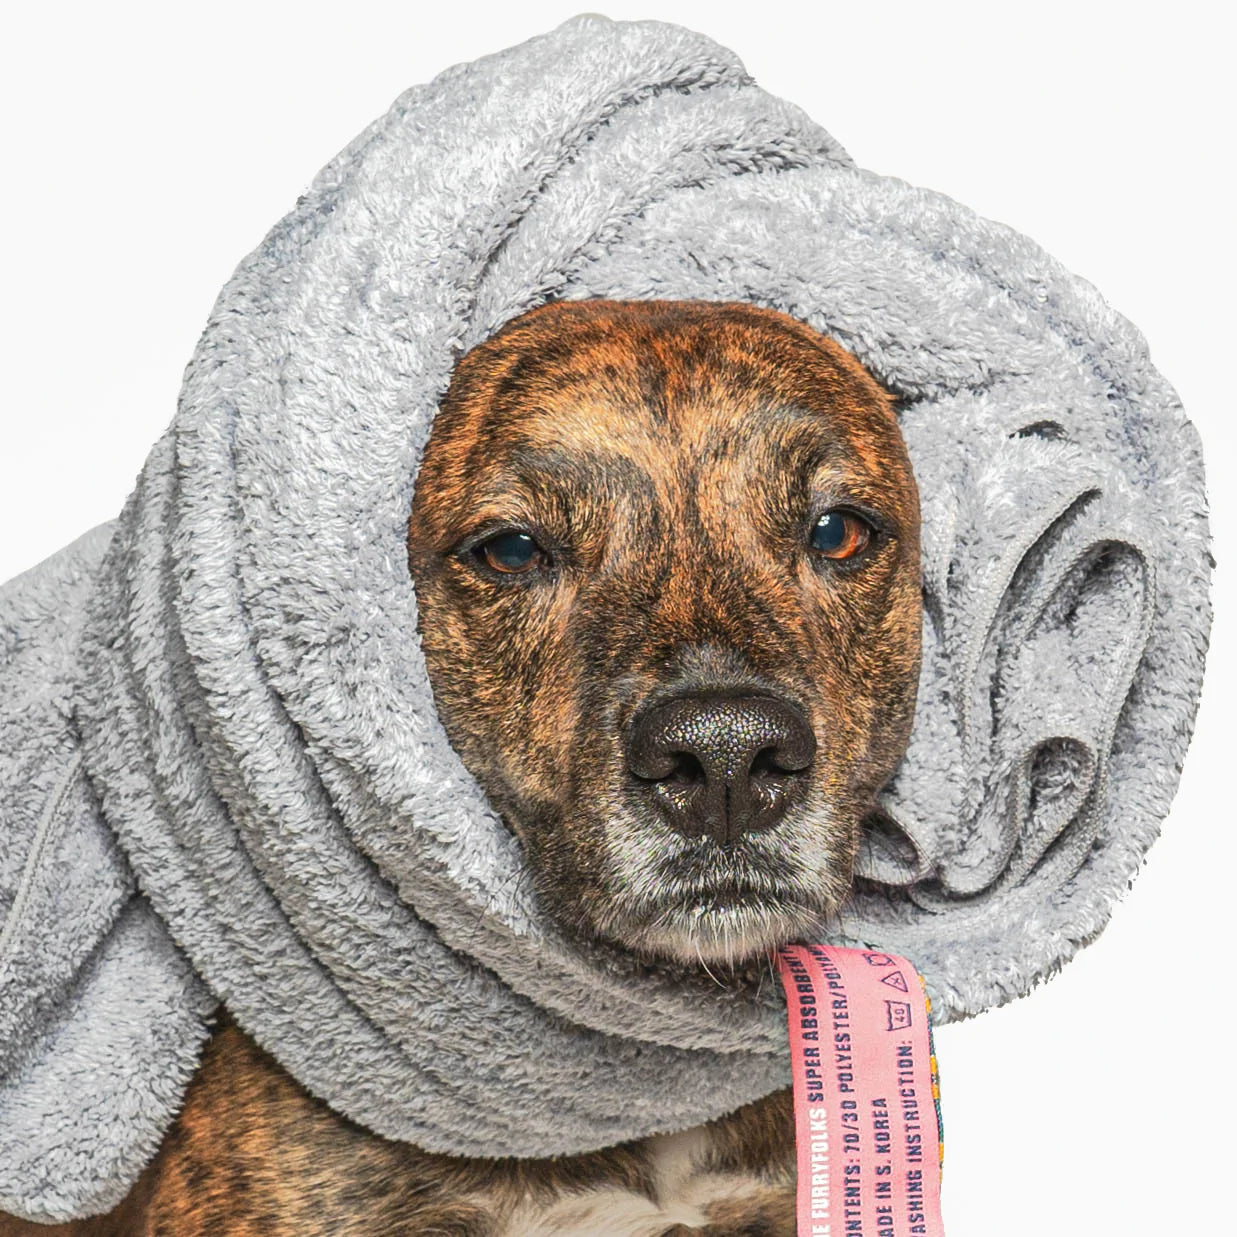 A patient dog wrapped in a luxurious grey microfiber dog towel, looking at the camera with a relaxed expression. The towel's plush fabric promises efficient drying and comfort, while the visible part of the measuring tape adds an amusing detail, indicating perhaps a recent grooming session or fitting.